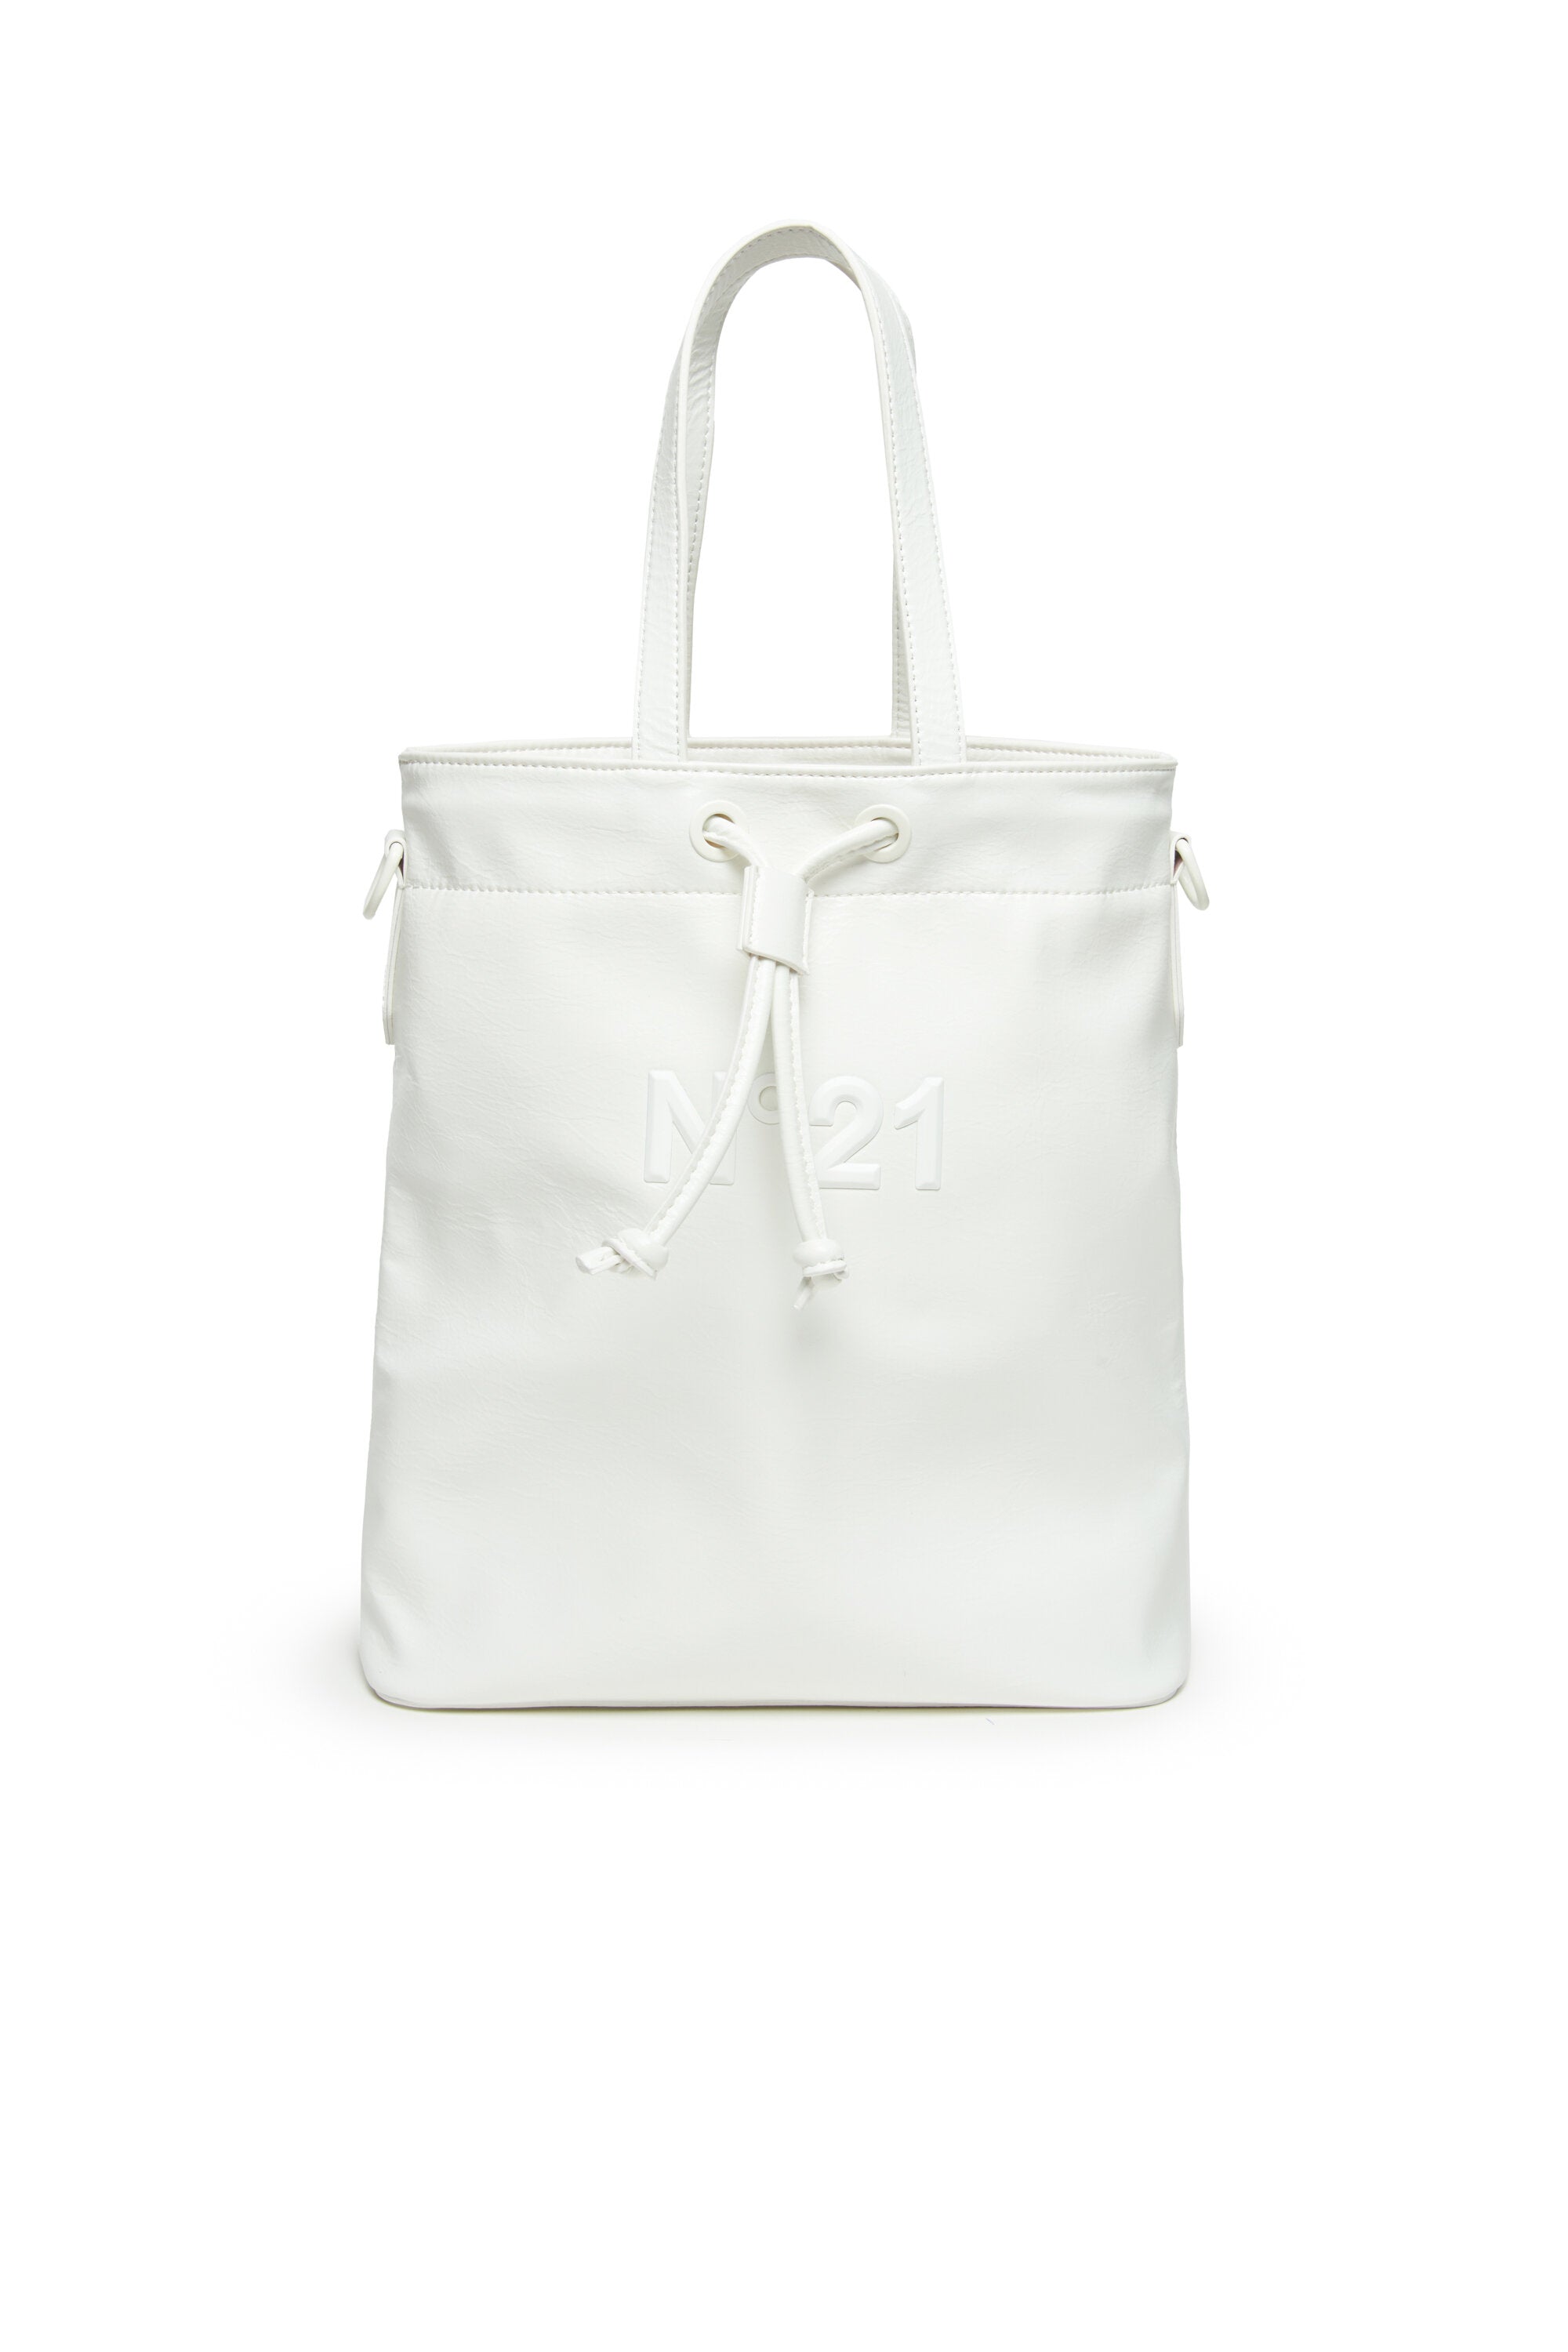 White bucket bag in leatherette with handles and shoulder strap